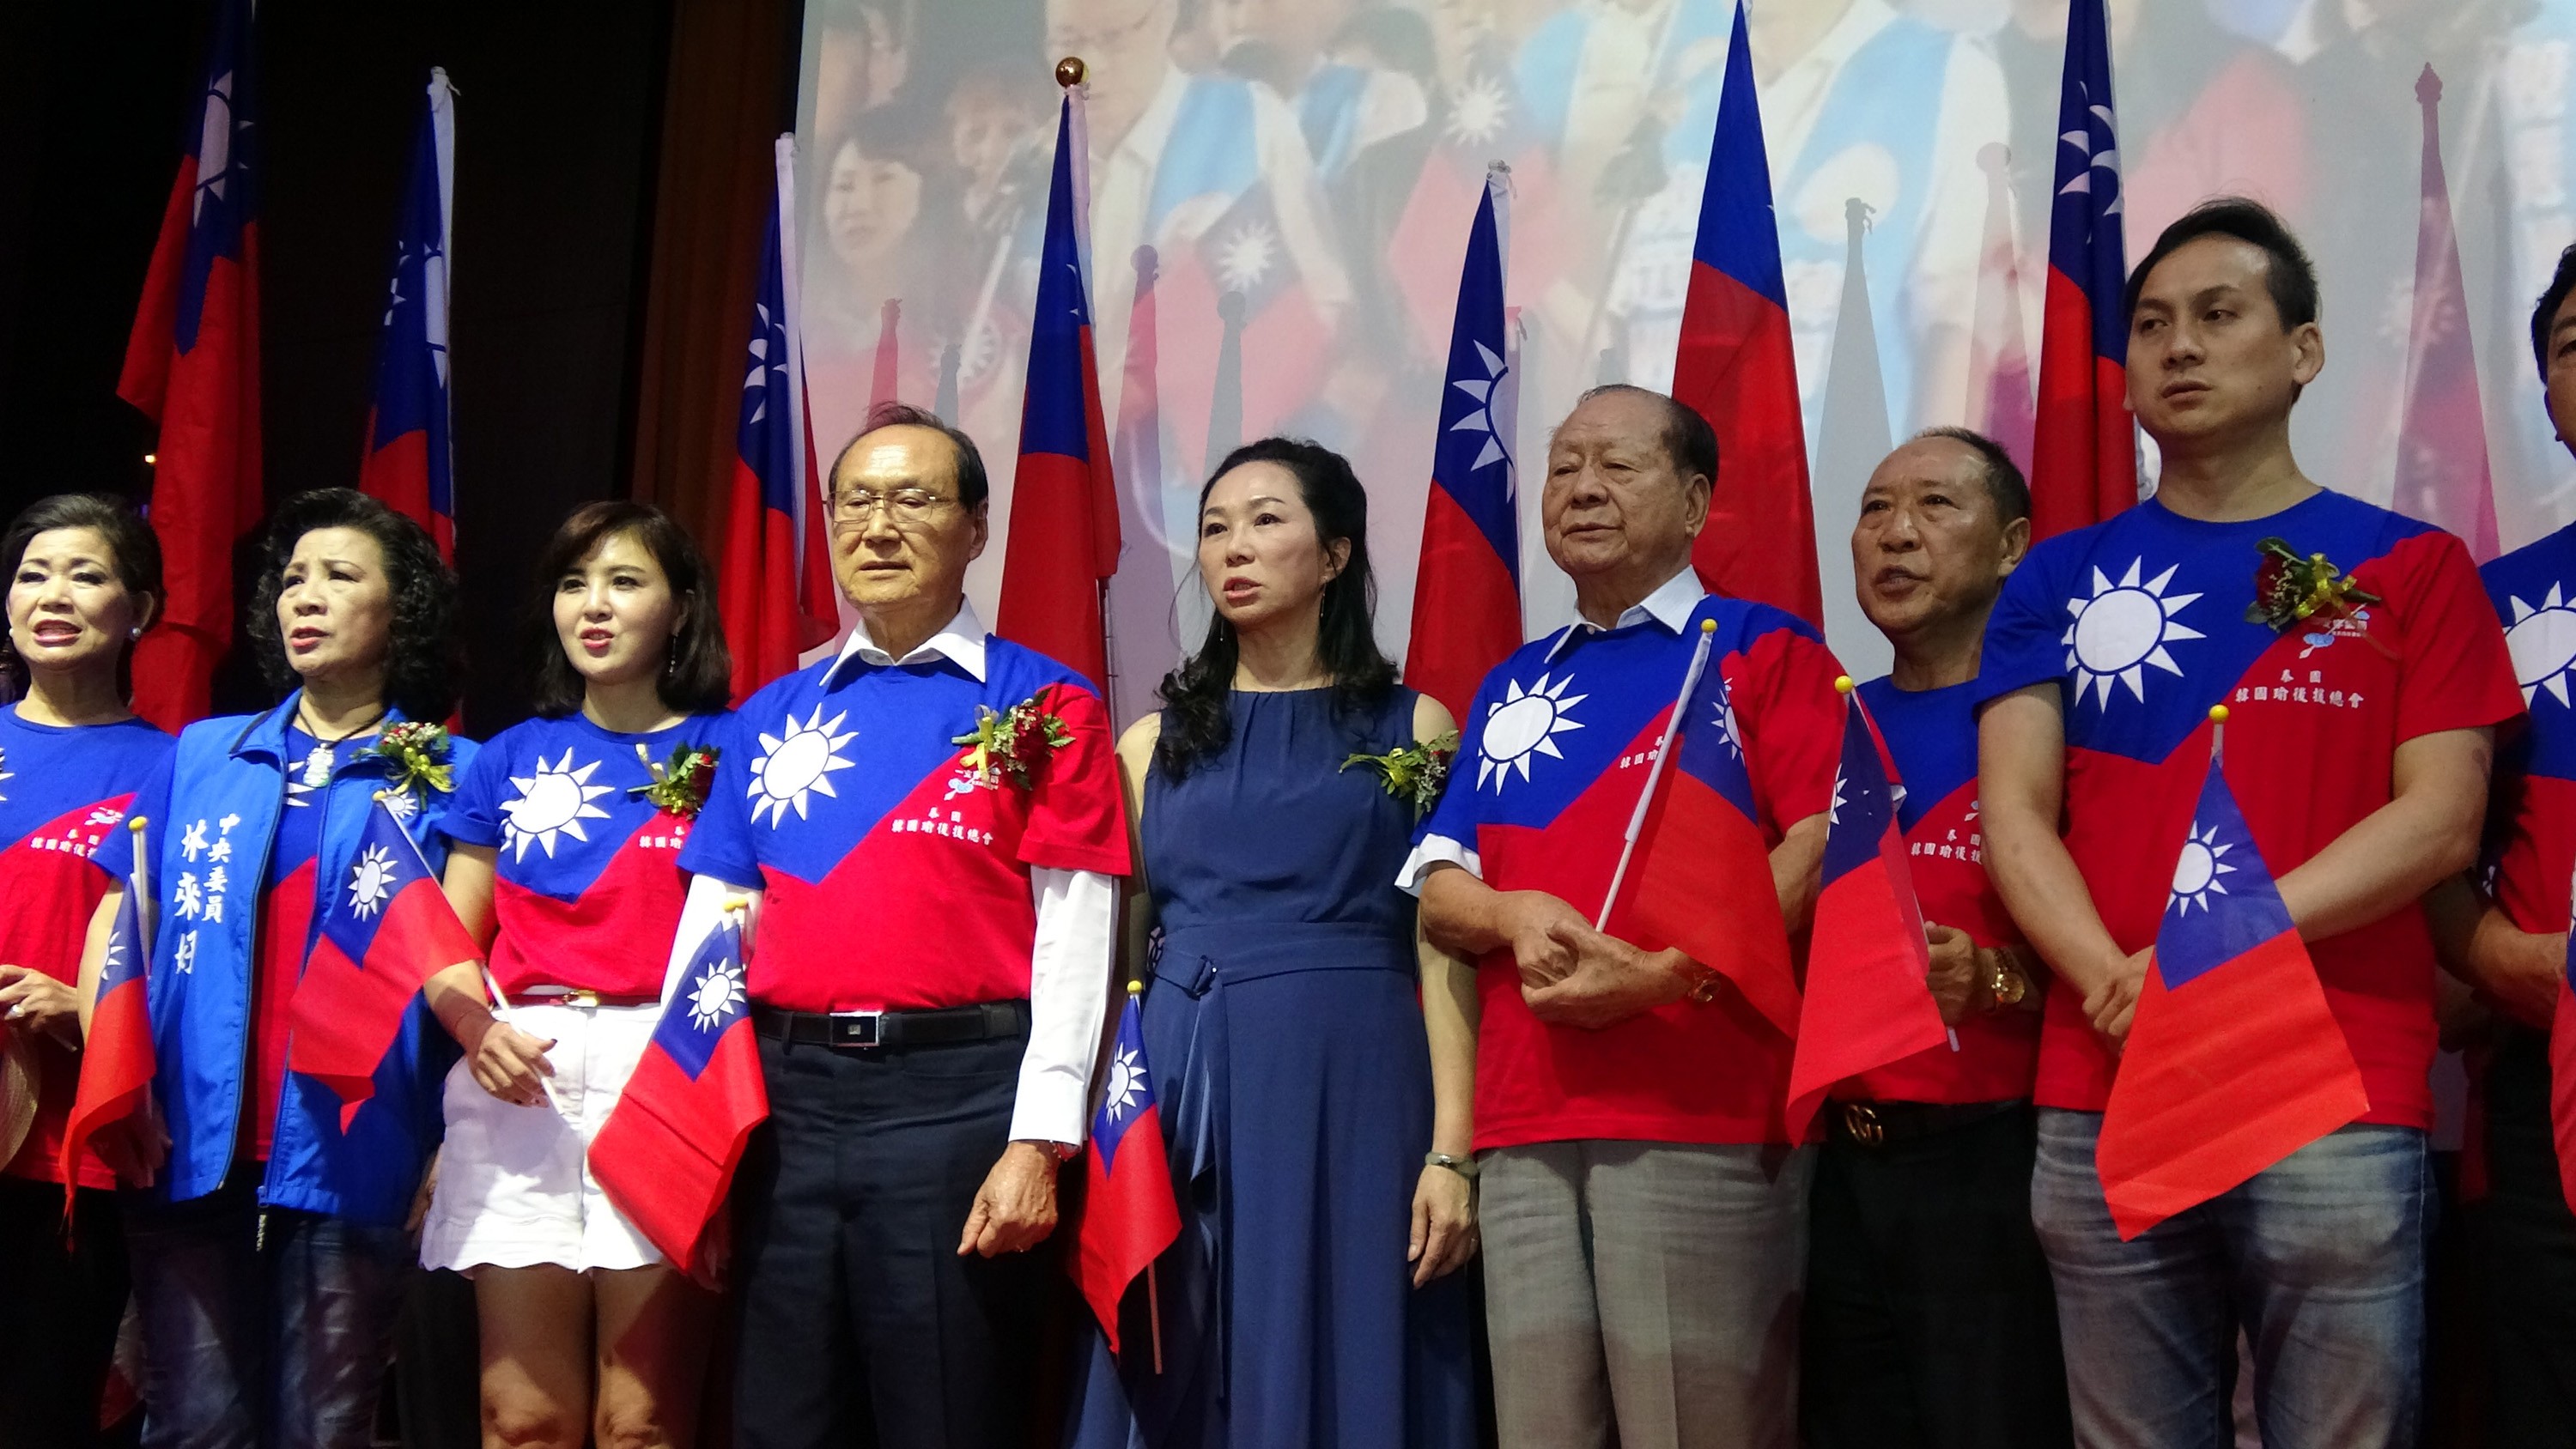 Lee Chia-fen (centre) at a campaign event in Thailand last Tuesday. Photo: CNA